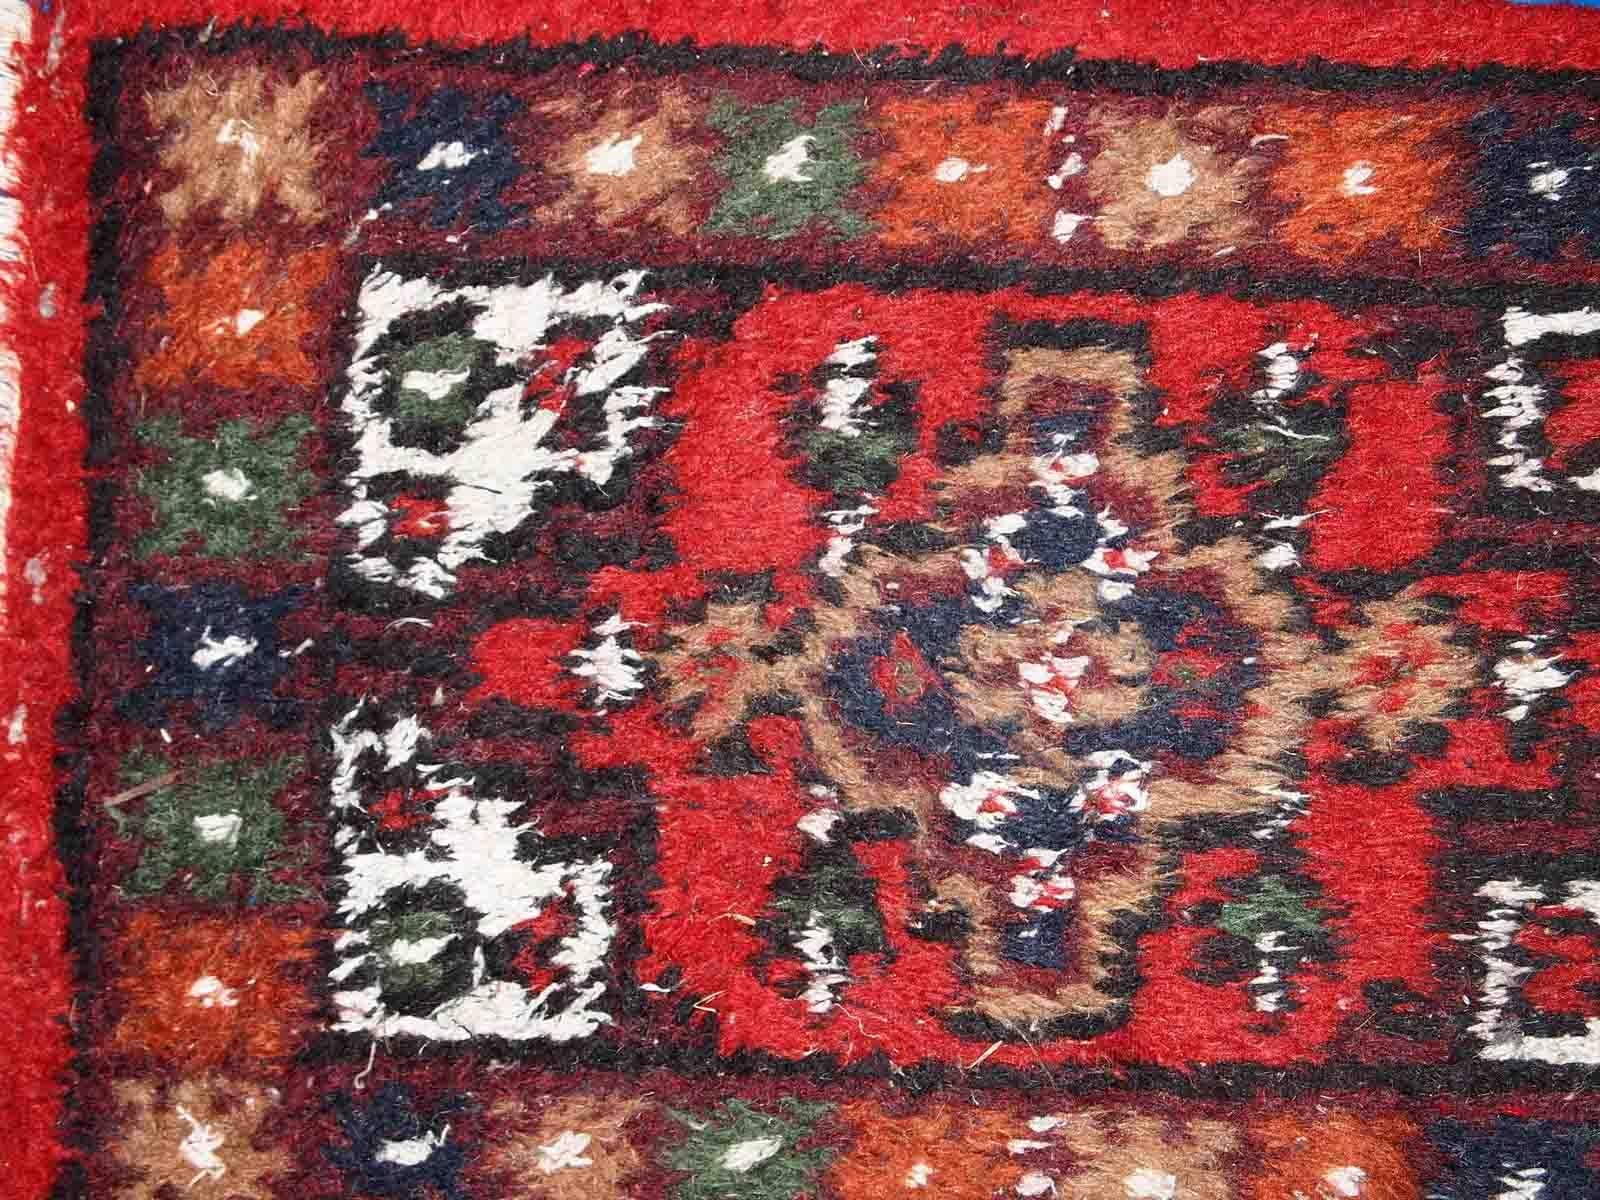 Vintage handmade Middle Eastern mat in original good condition. The rug is from the end of 20th century.

-condition: original good, 

-circa: 1970s,

-size: 1.3' x 1.9' (41cm x 59cm),

-material: wool,

-country of origin: Middle